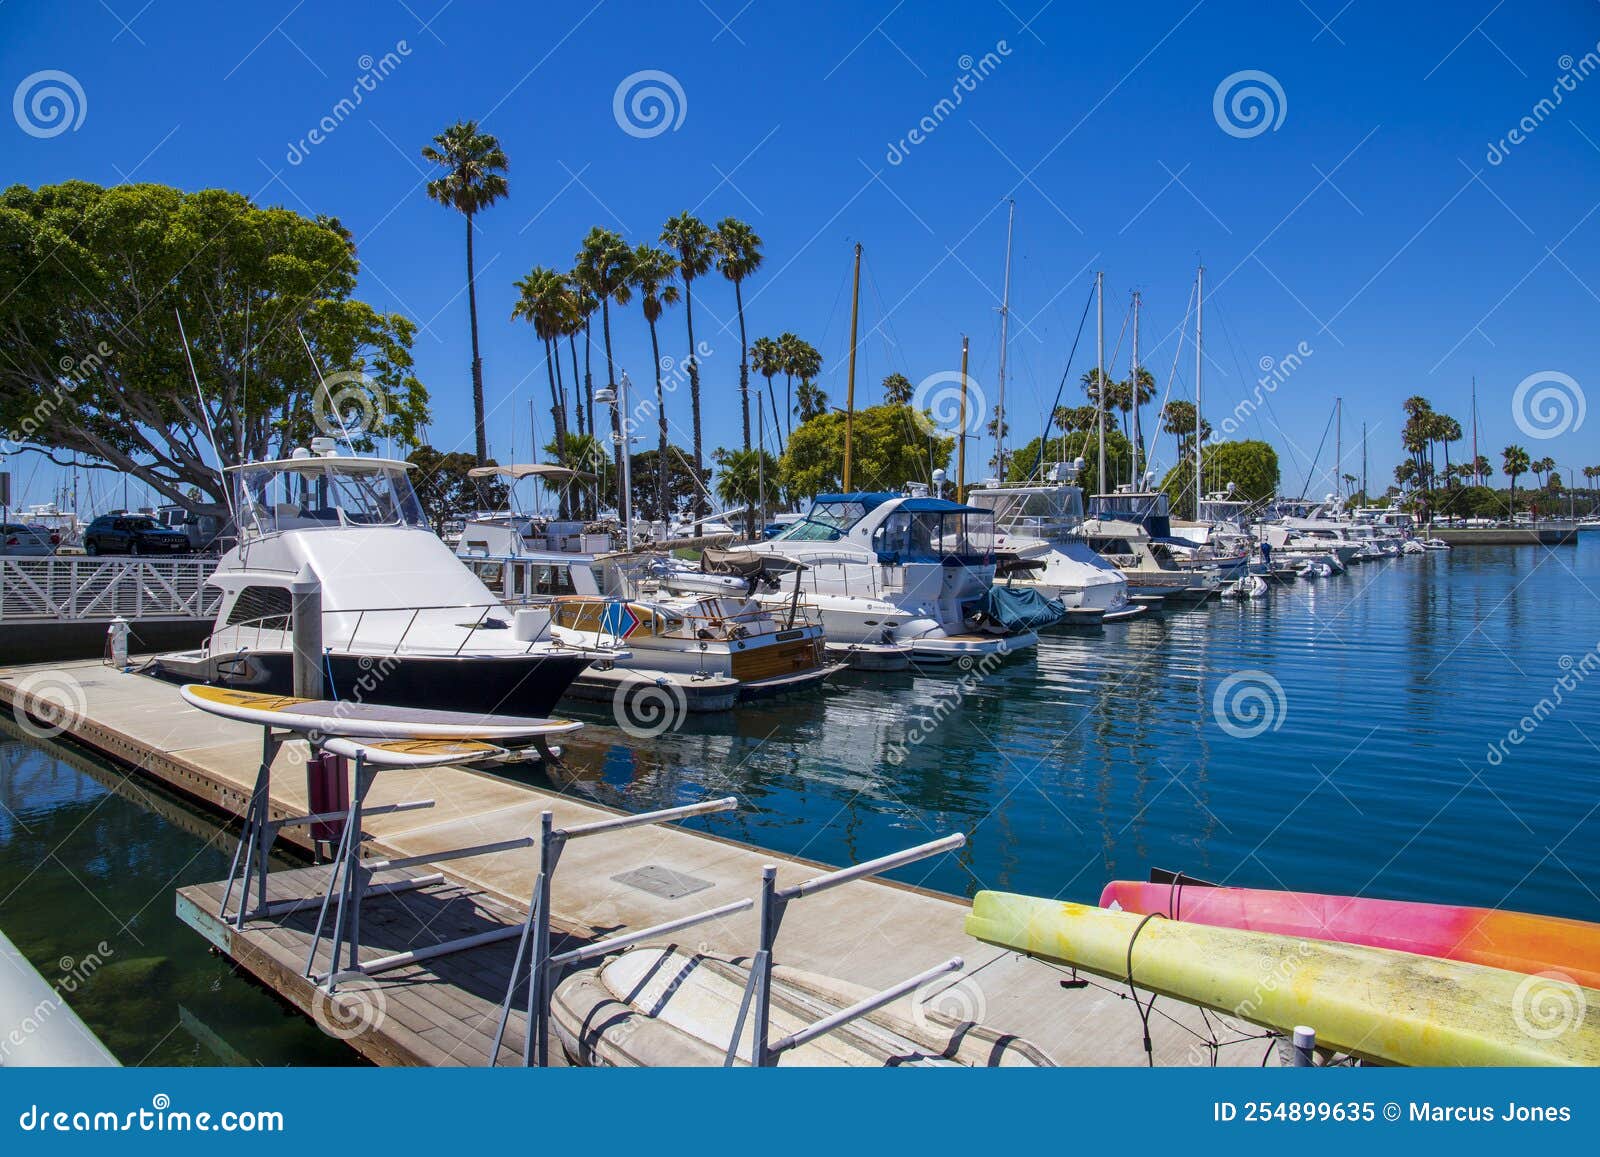 A Gorgeous Summer Landscape in the Marina with Boats and Yachts Docked ...